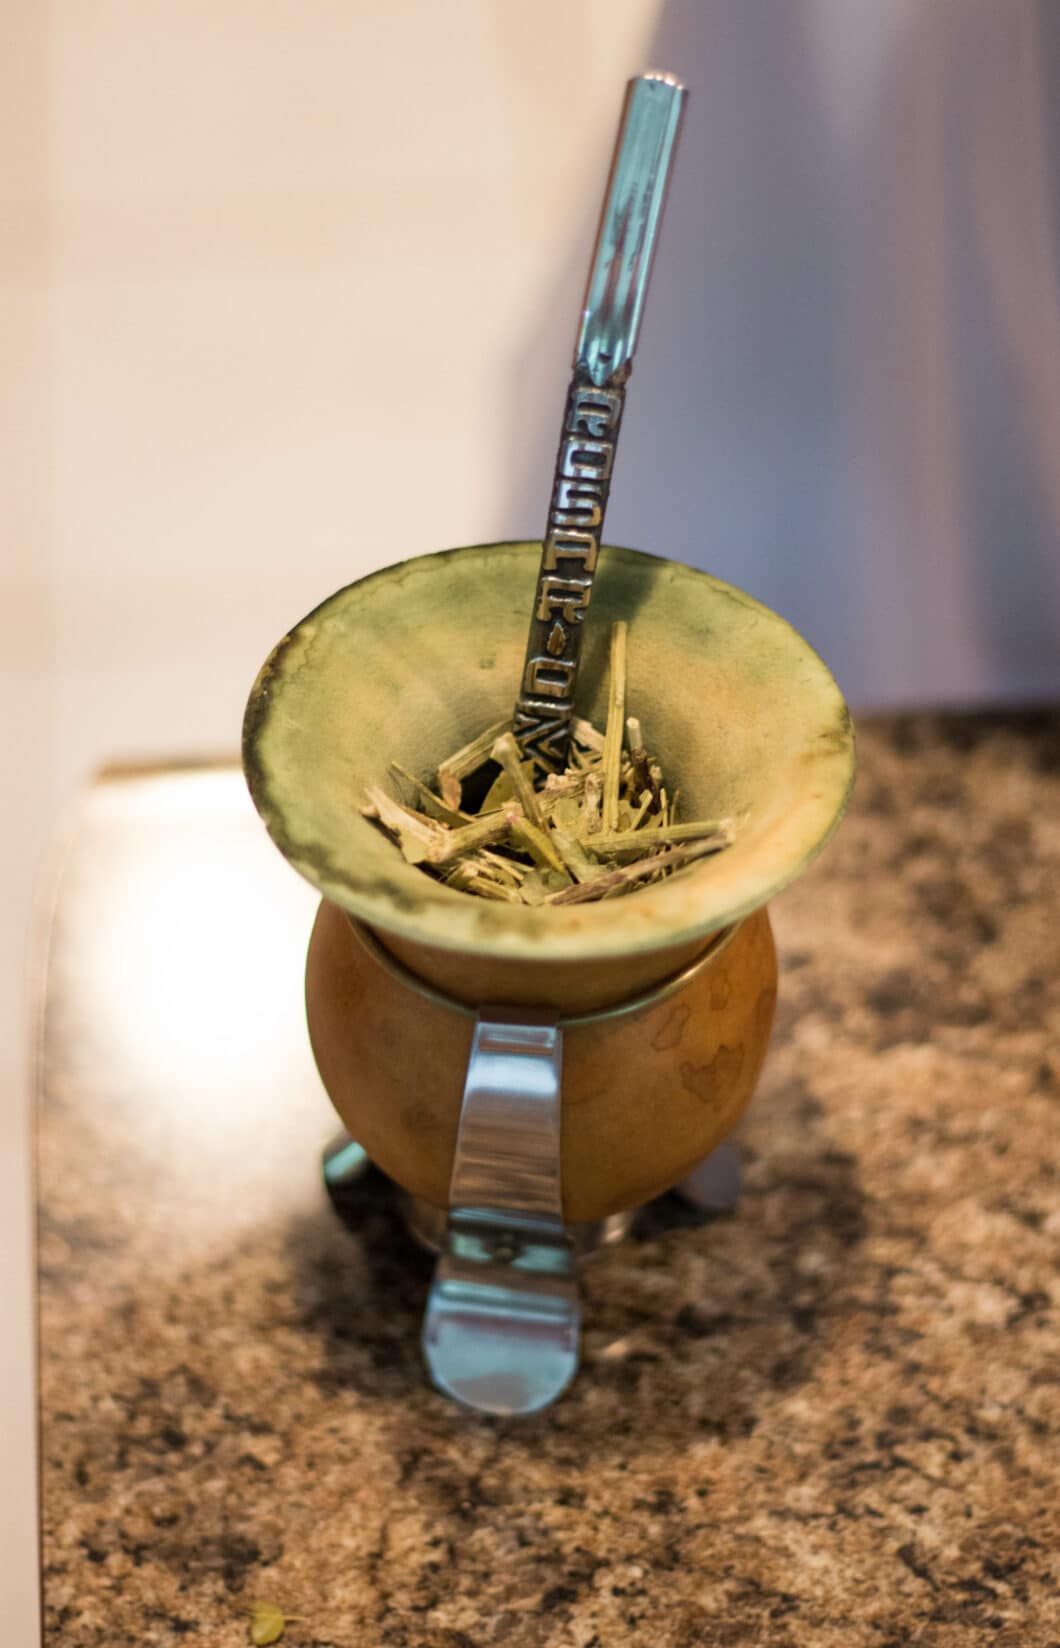 Mate gourd and bombilla 